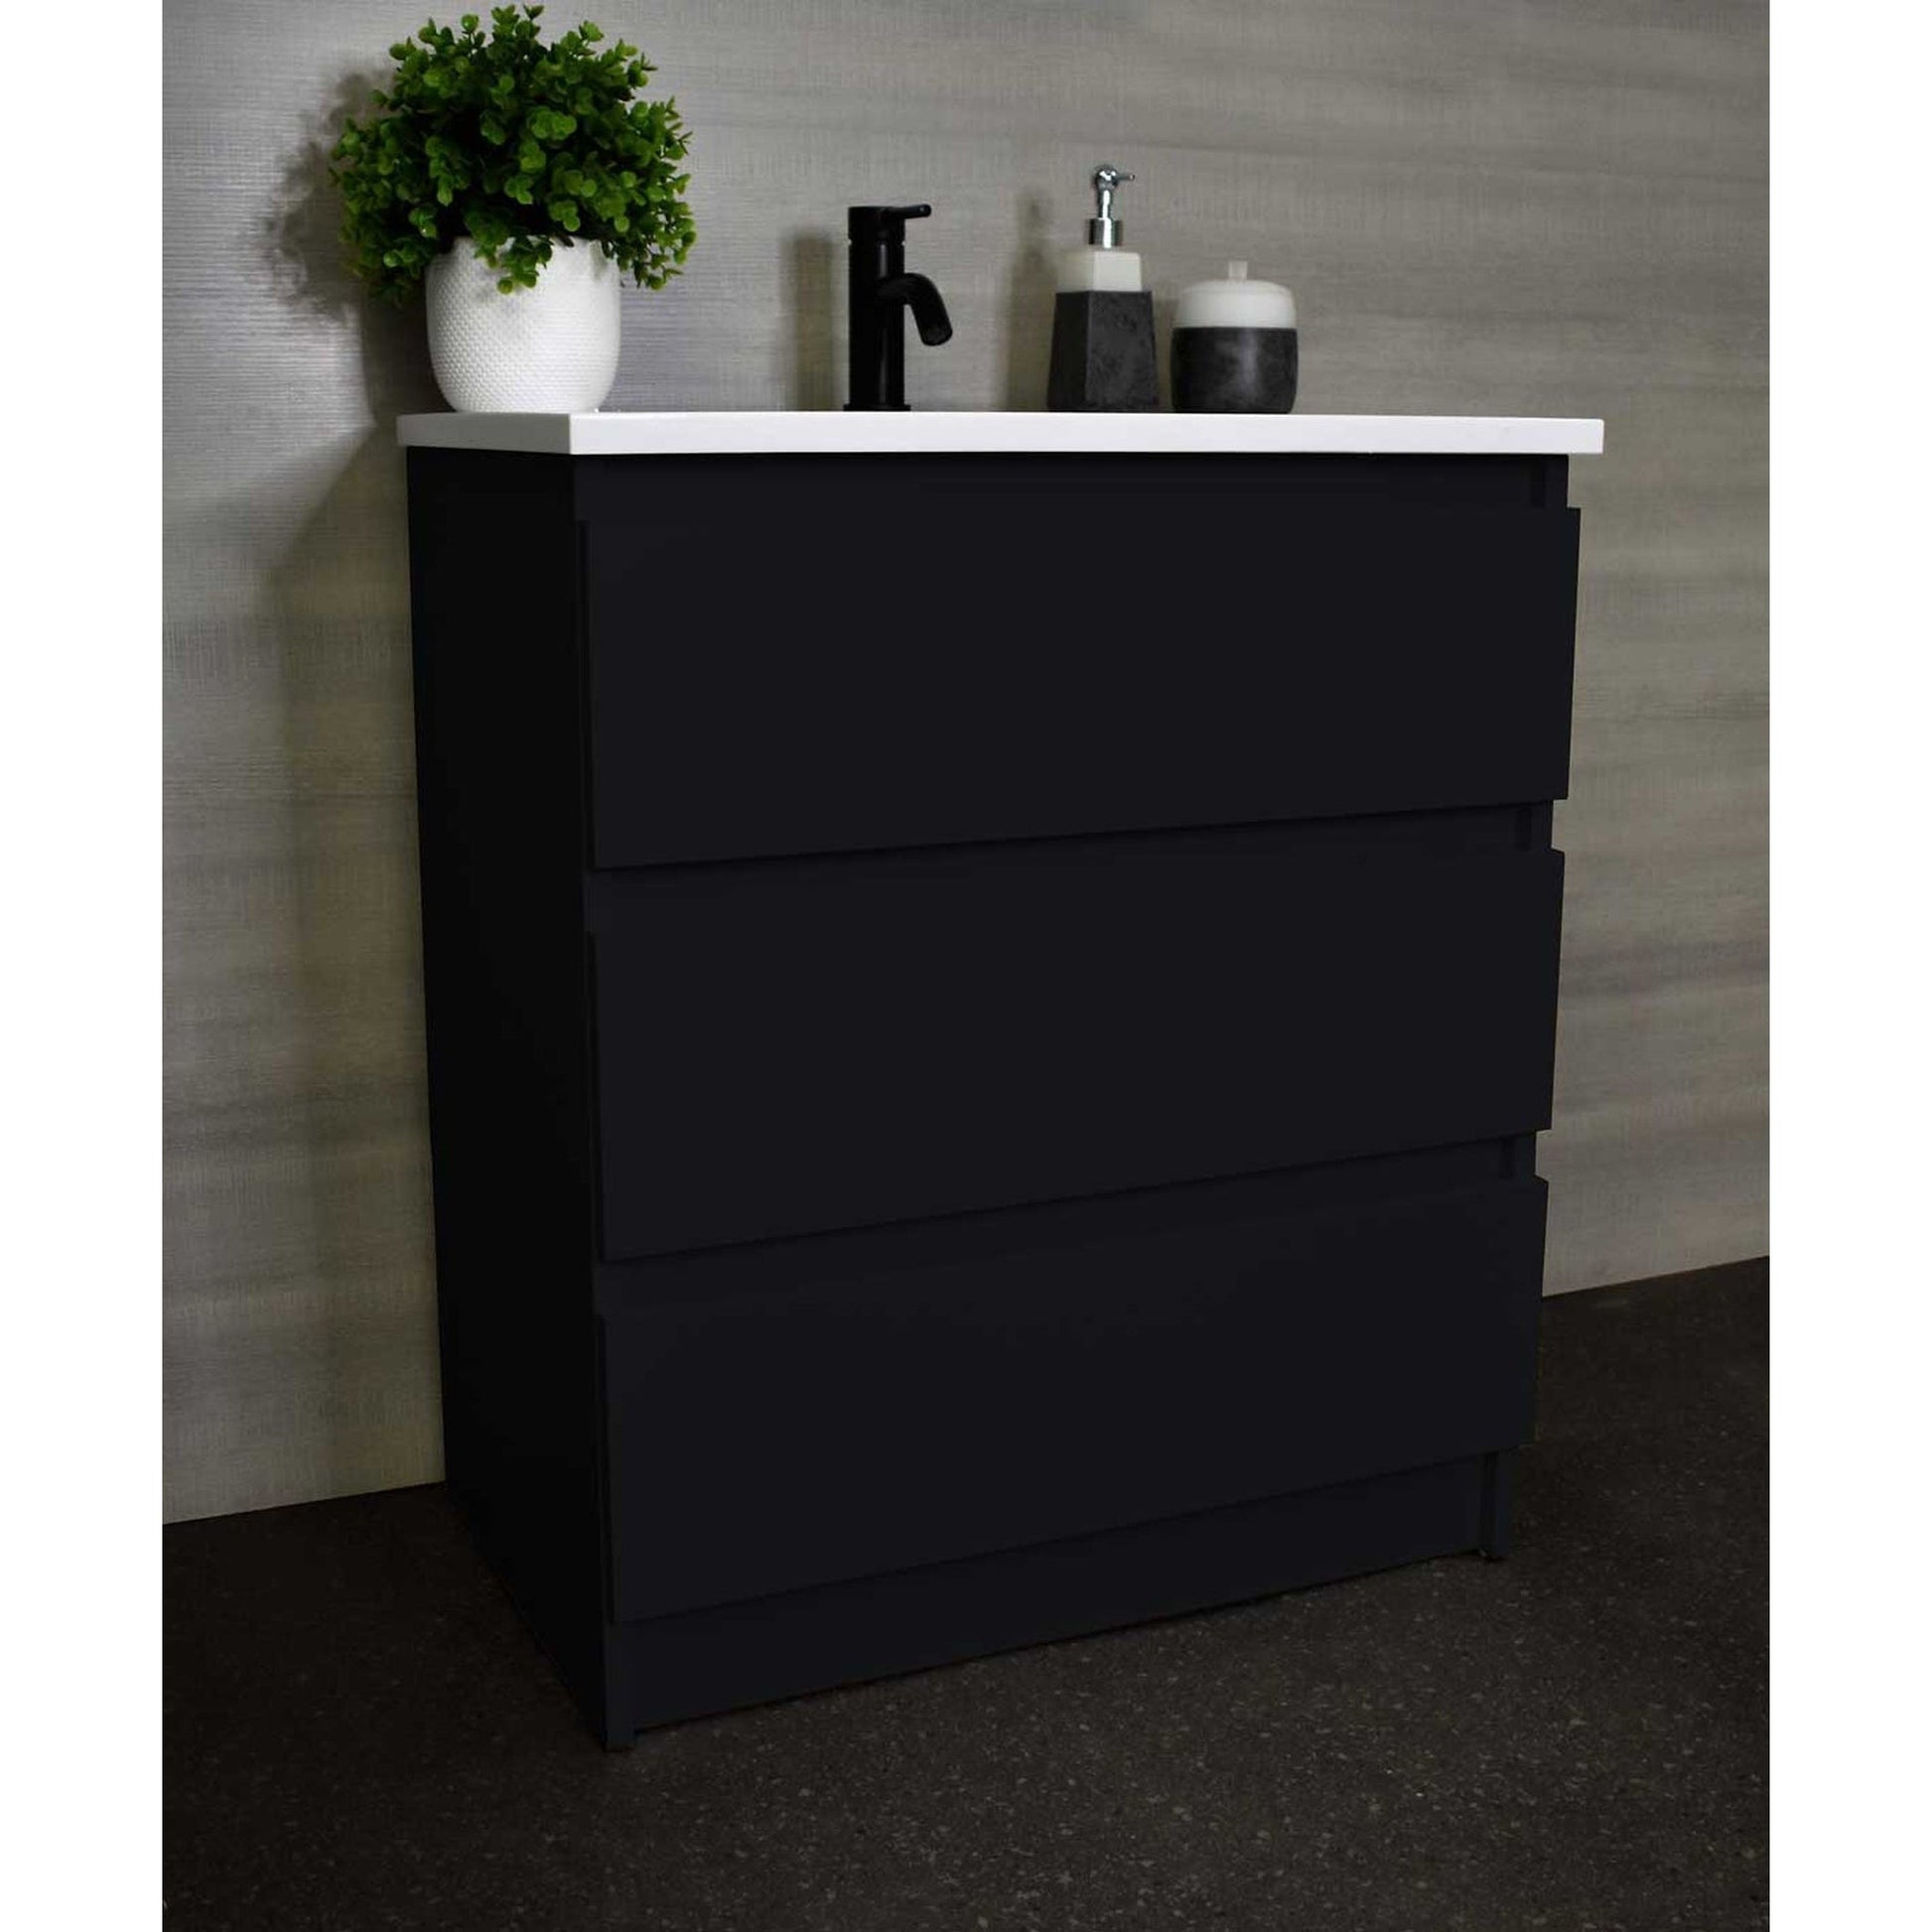 Volpa USA Pepper 30" x 20" Black Modern Freestanding Bathroom Vanity With Acrylic Top, Integrated Acrylic Sink and drawers